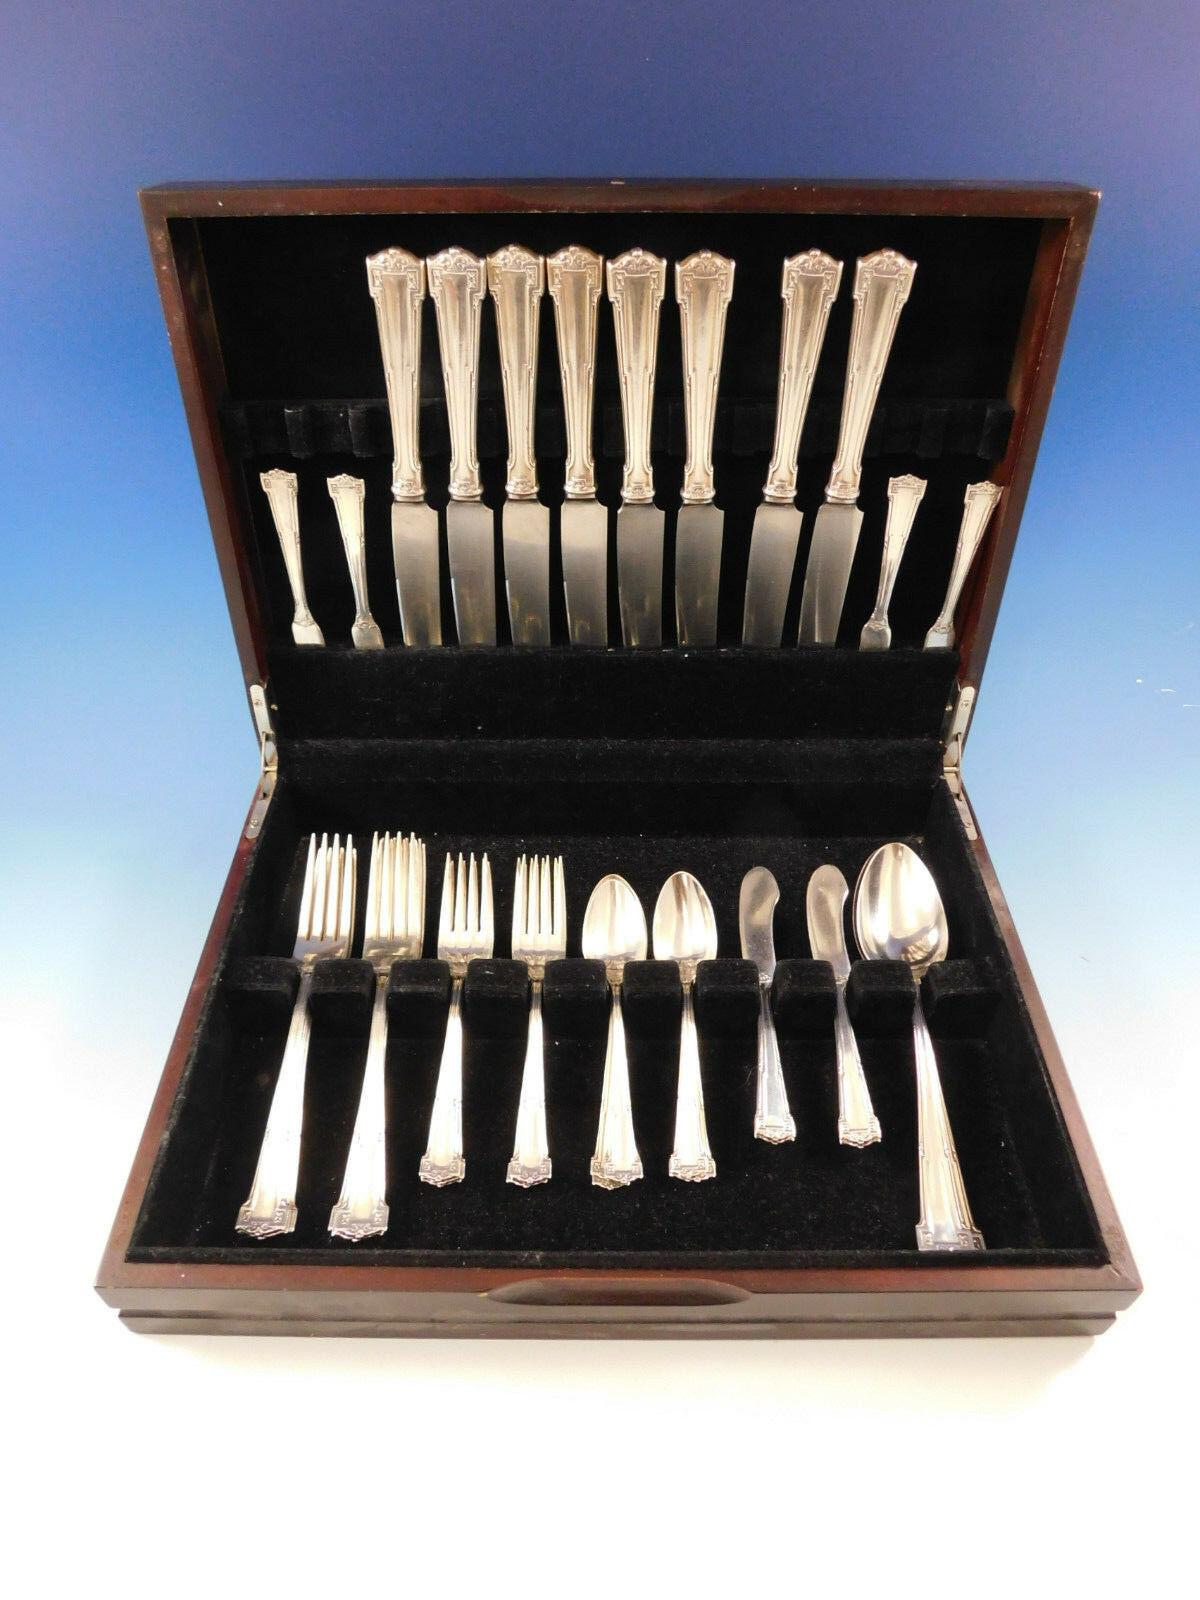 Art Deco Dinner Size Dauphine by Wallace sterling silver Flatware set, 42 pieces. This set includes:

8 Dinner Size Knives, 9 1/2